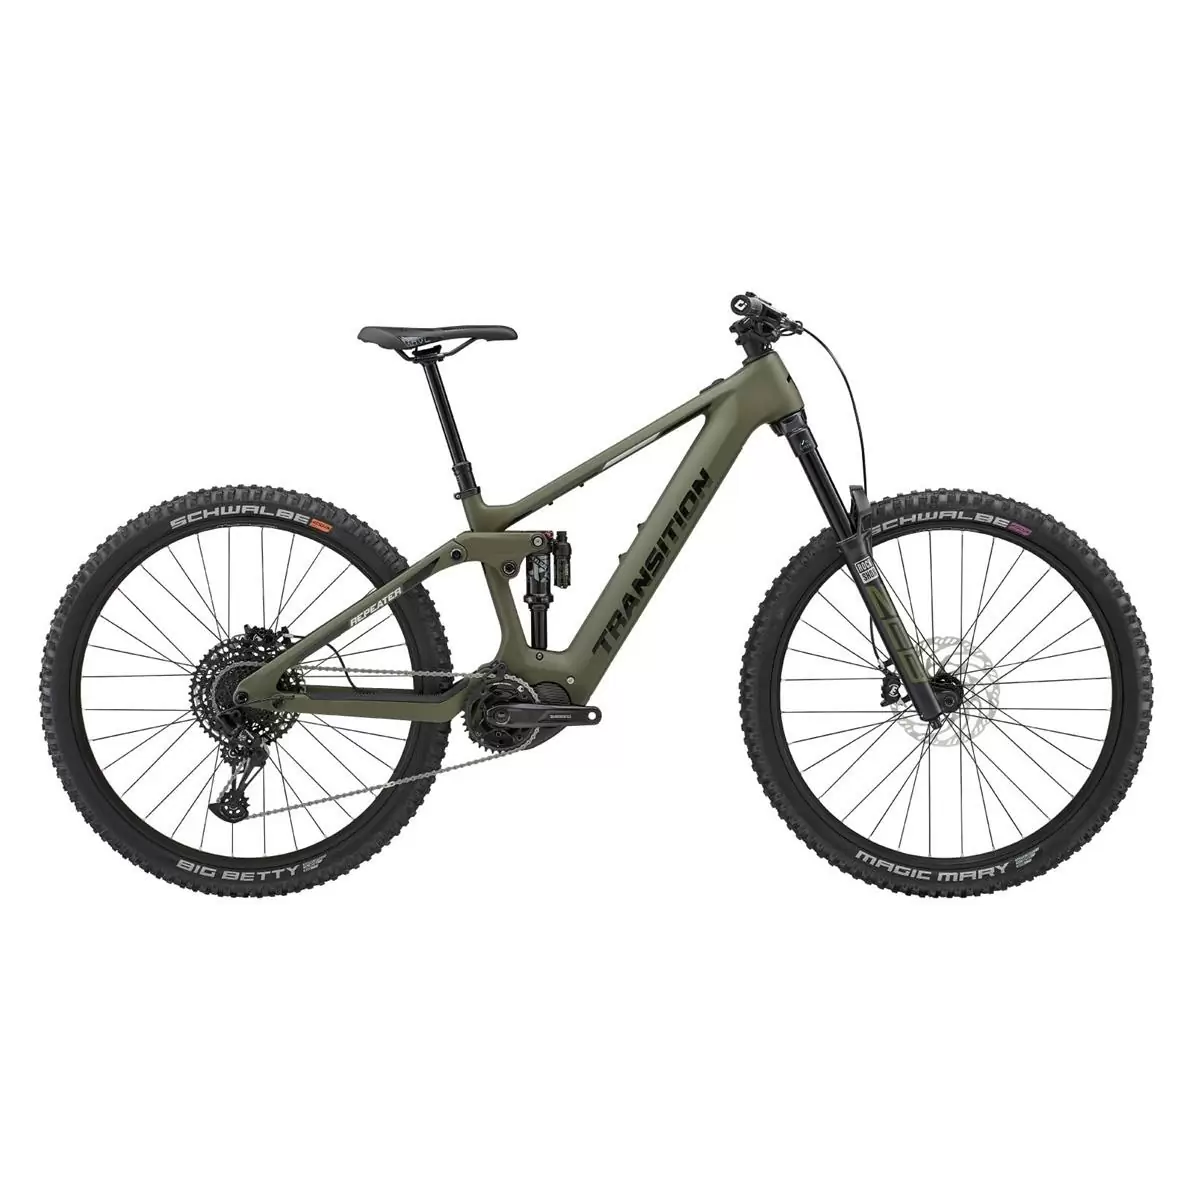 Repeater Carbon NX 29'' 160mm 12s 630Wh Shimano EP8 Mossy Green 2022 Size S - image